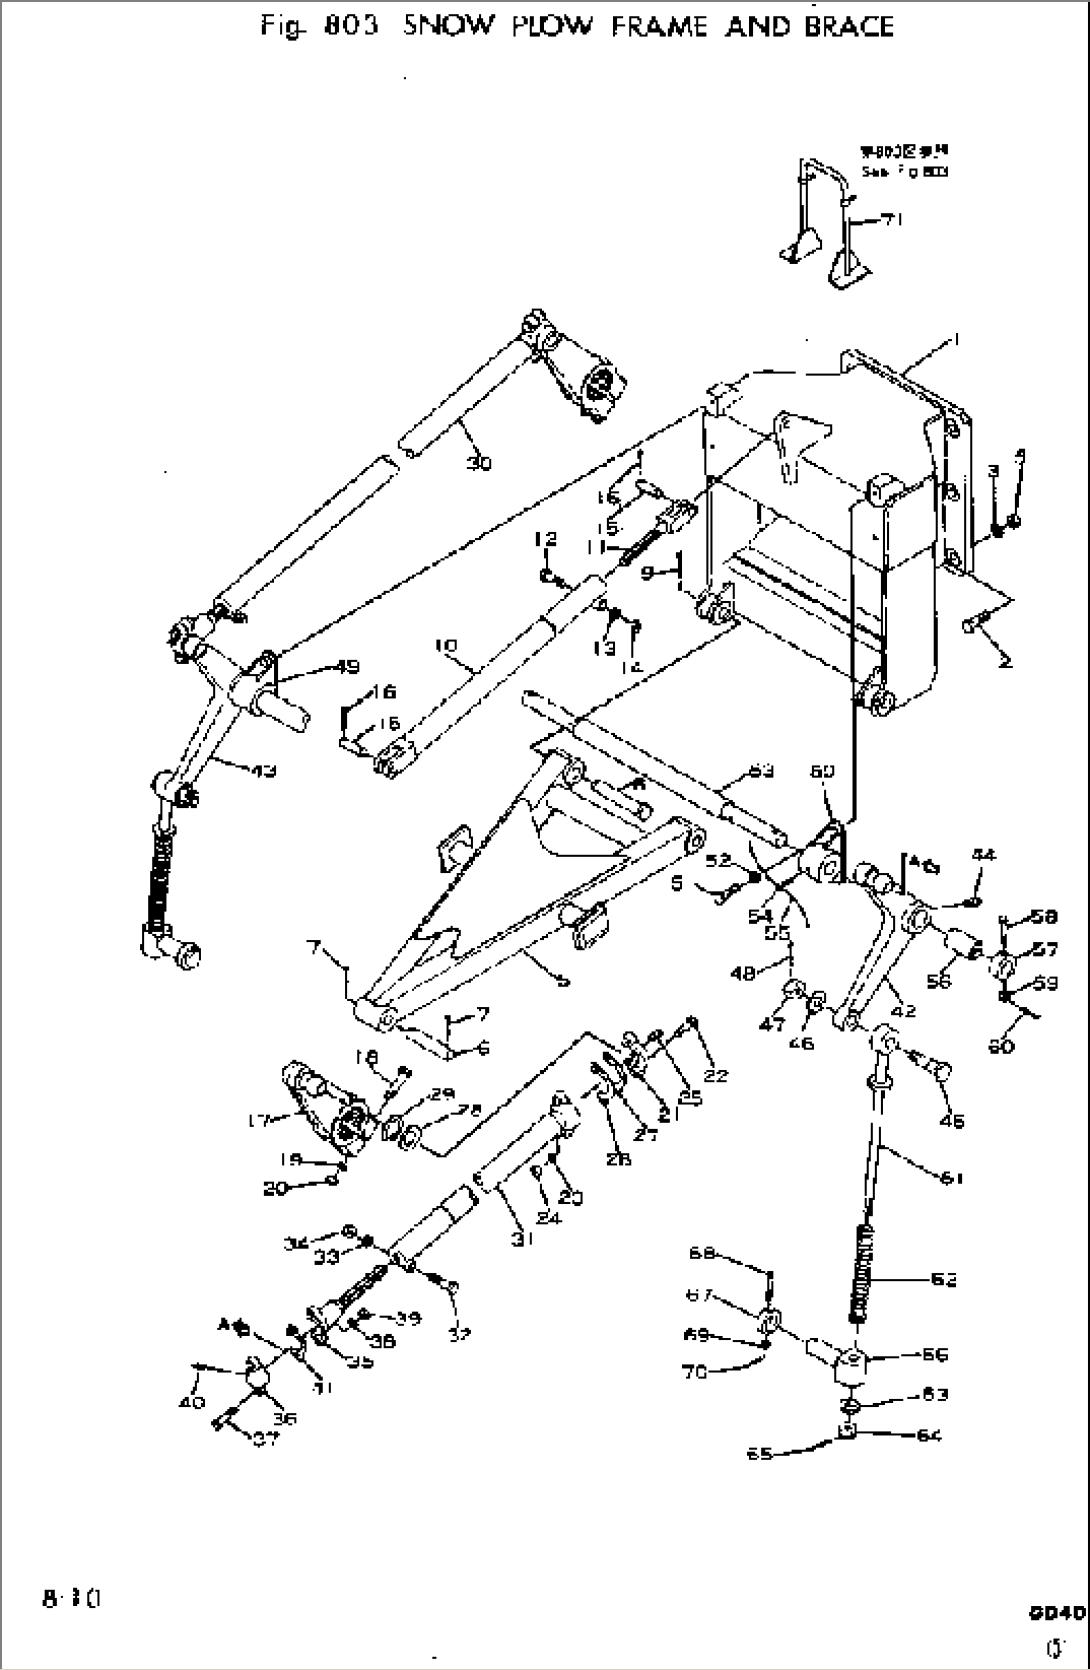 SNOW PLOW FRAME AND BRACE